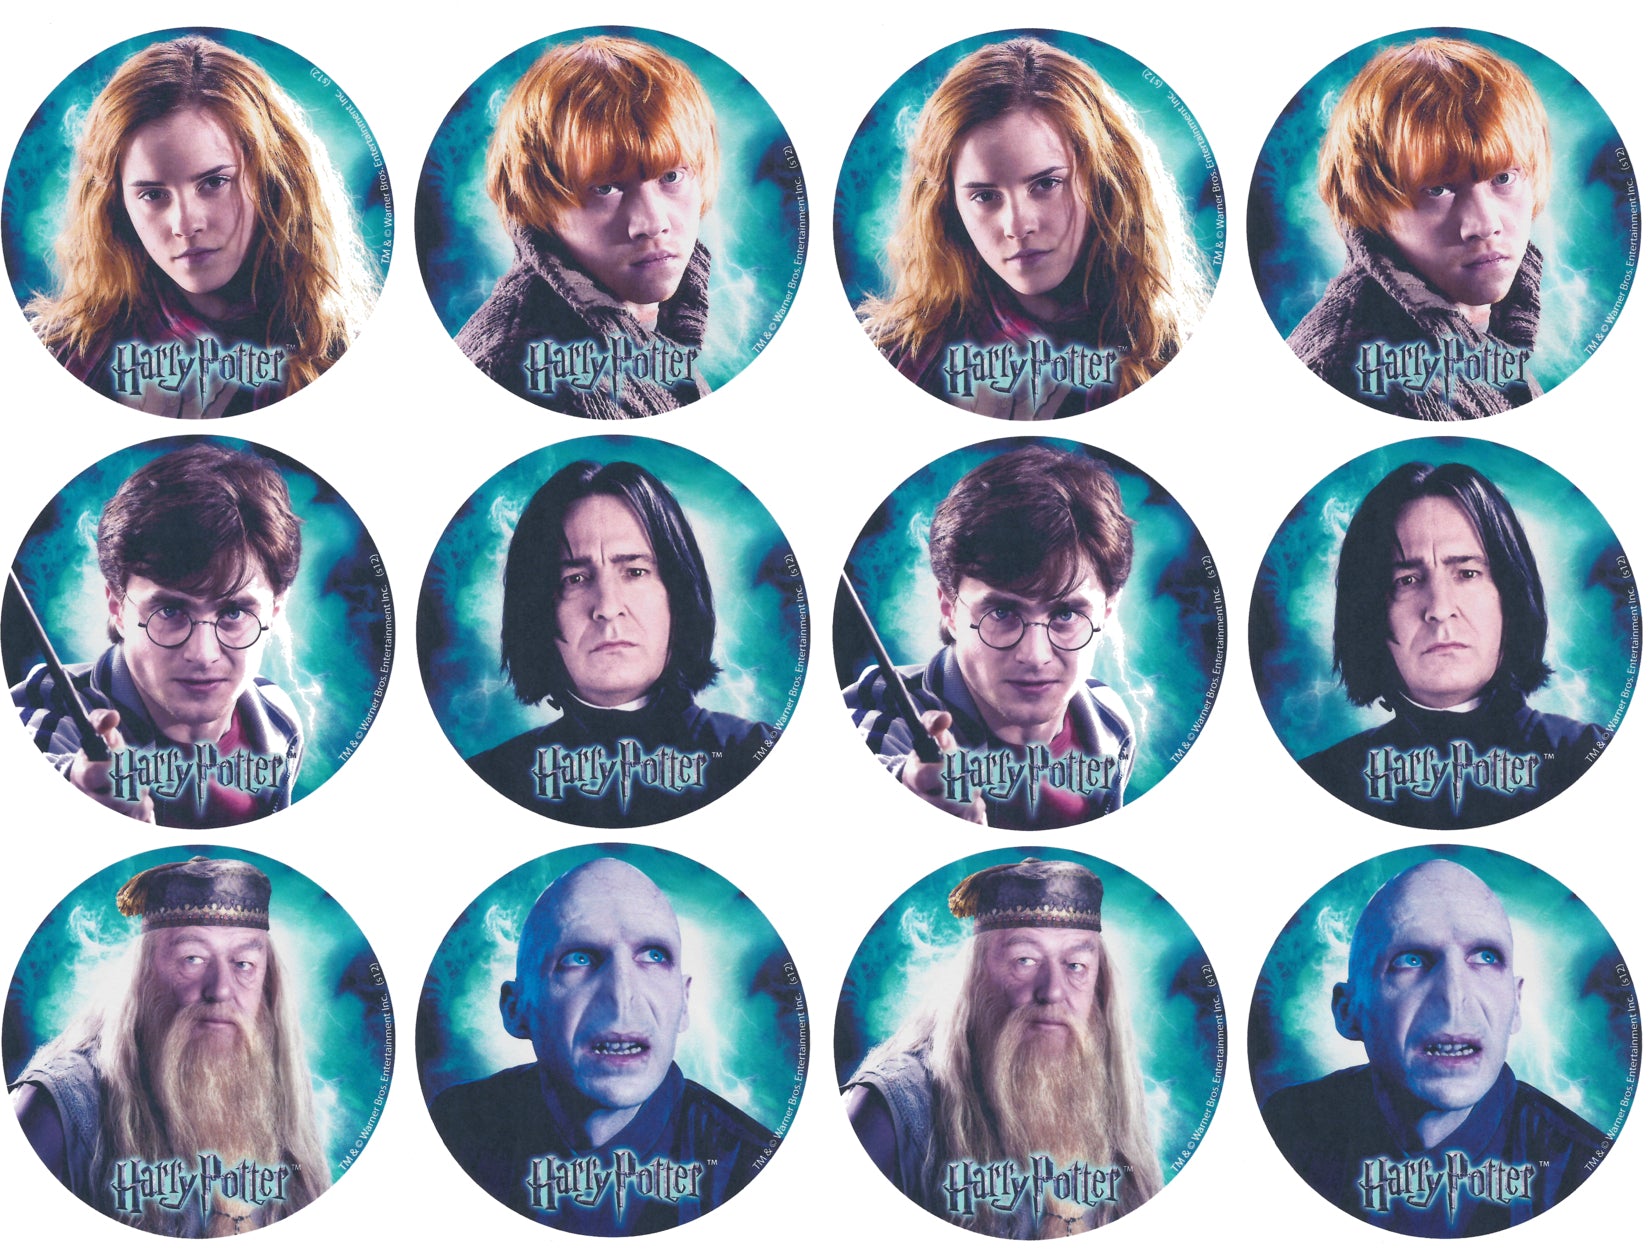 Harry Potter Hermione Granger Ronald Weasley and Albus Dumbledore Edible Cupcake Topper Images ABPID04234